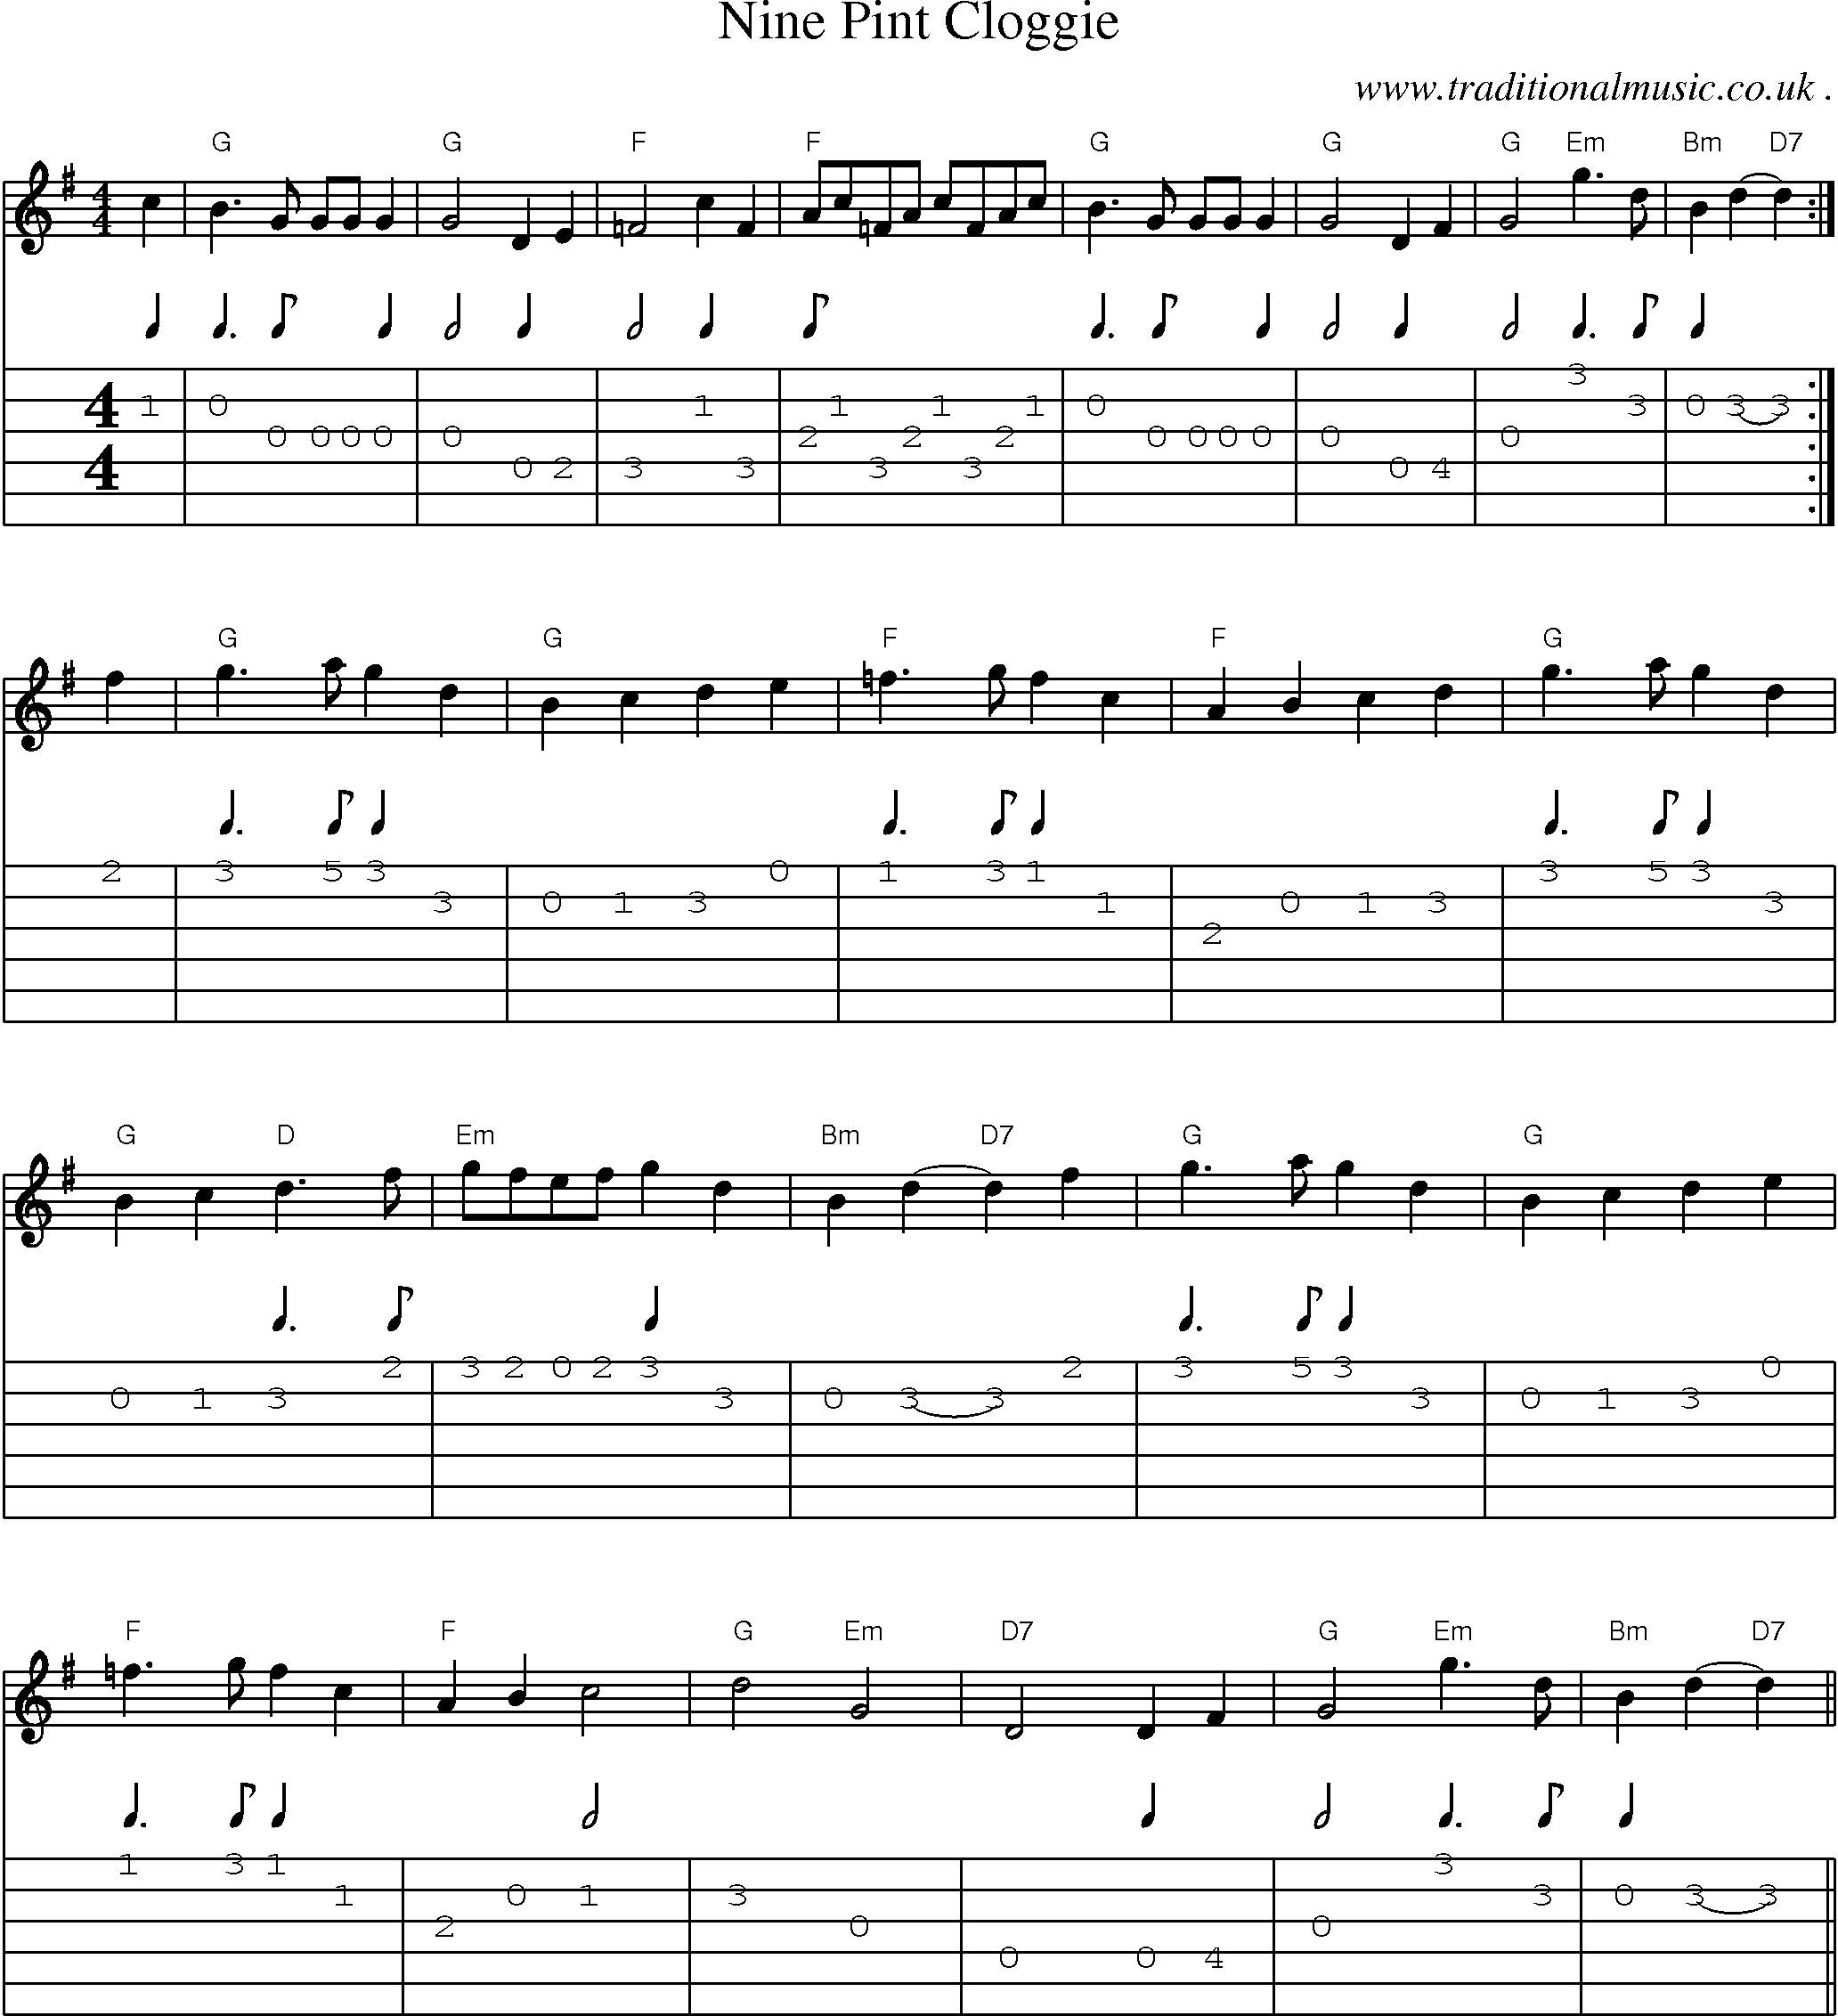 Sheet-Music and Guitar Tabs for Nine Pint Cloggie